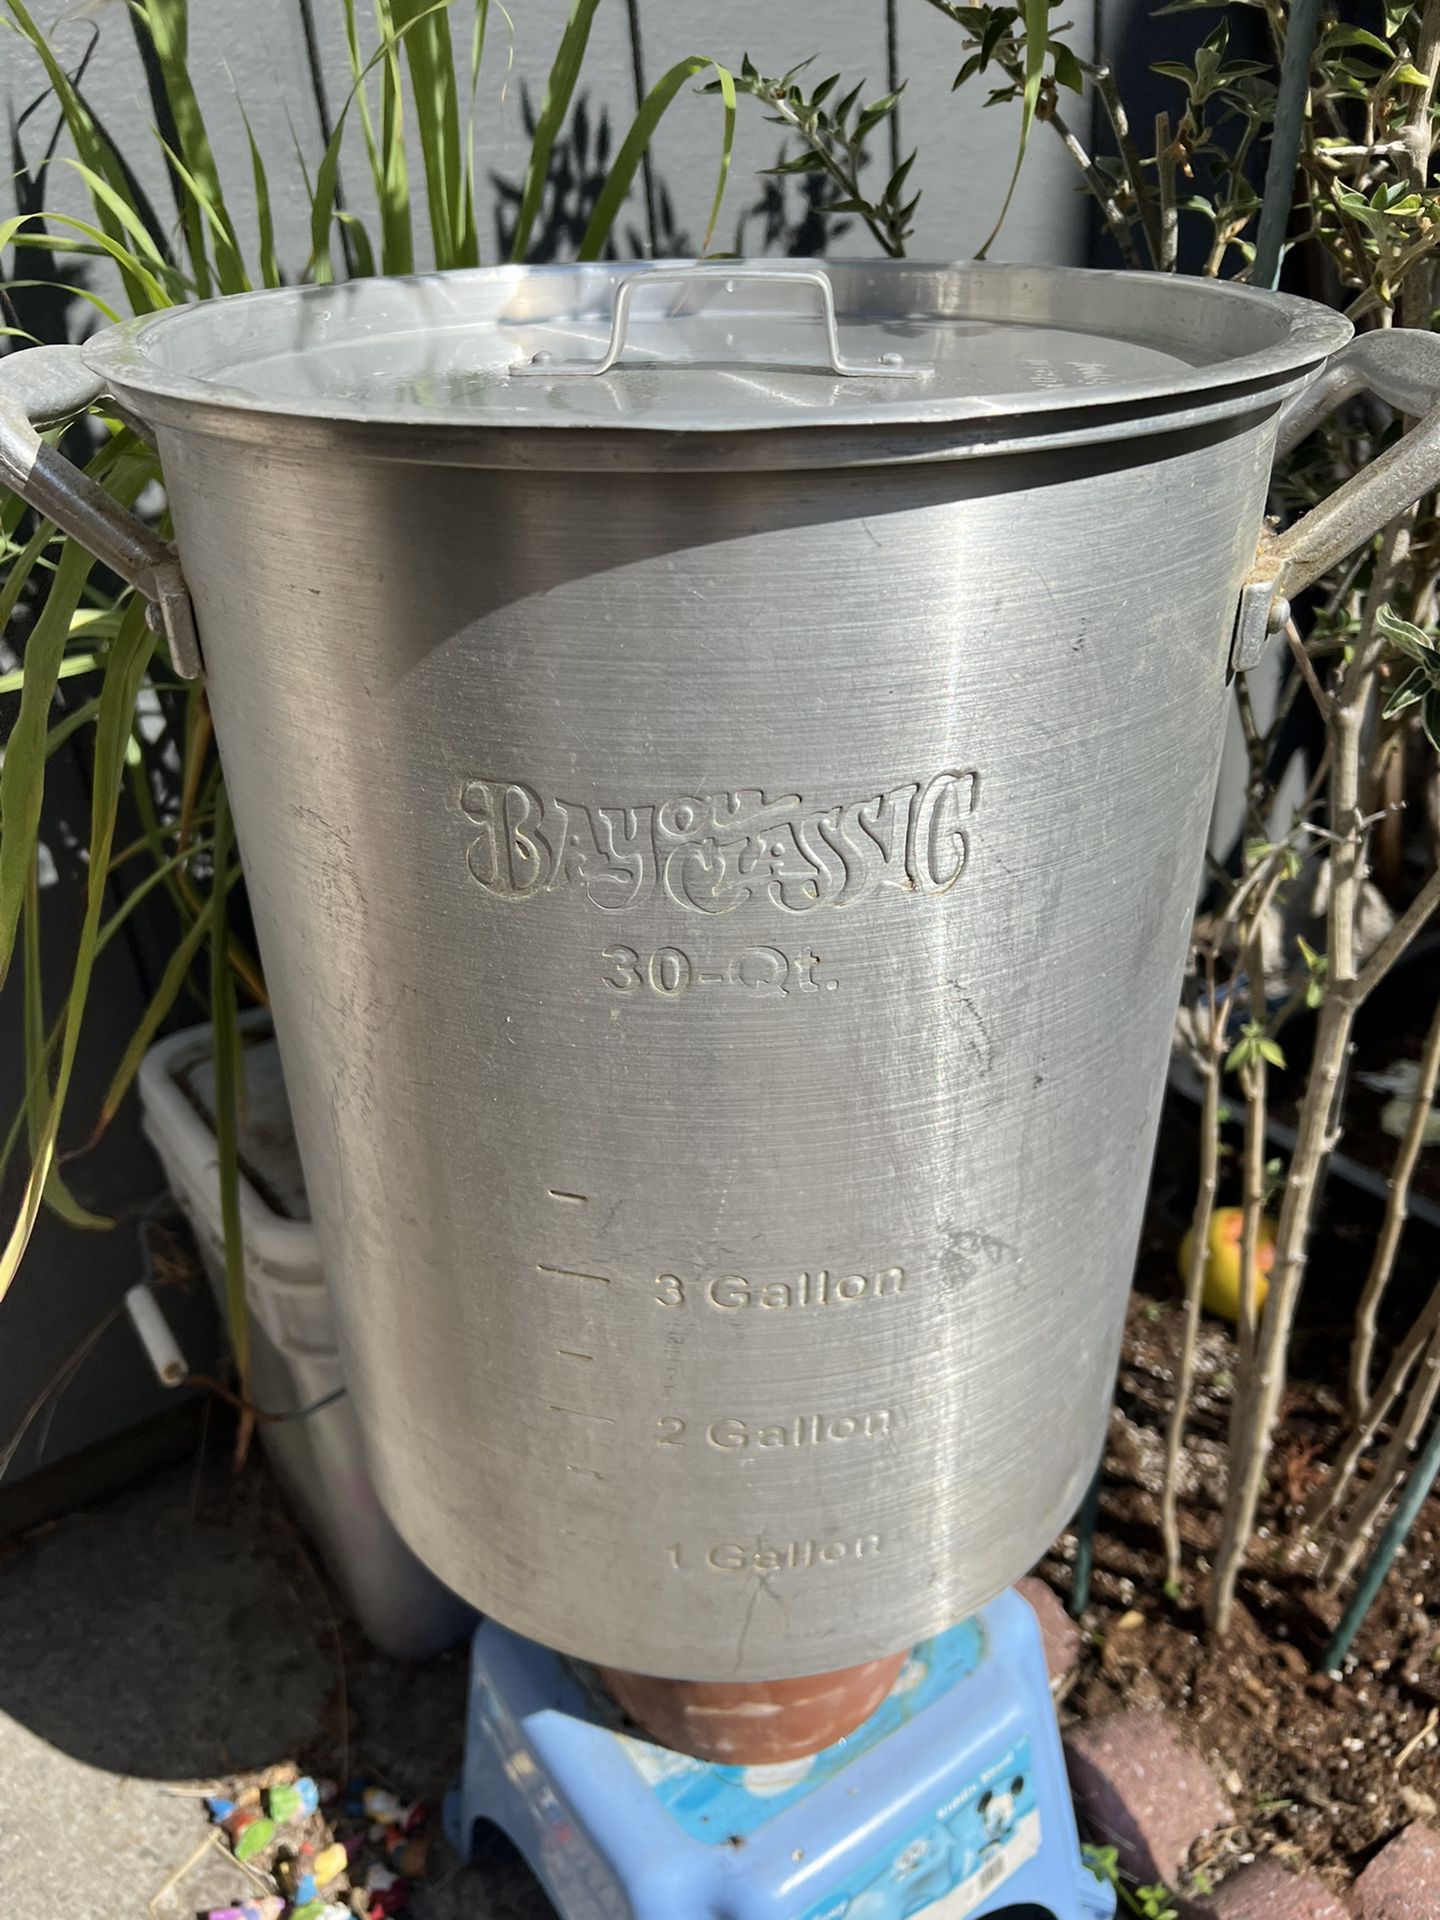 Bayou Classic 30 Qt. Outdoor Turkey Fryer Pot with Vented Lid